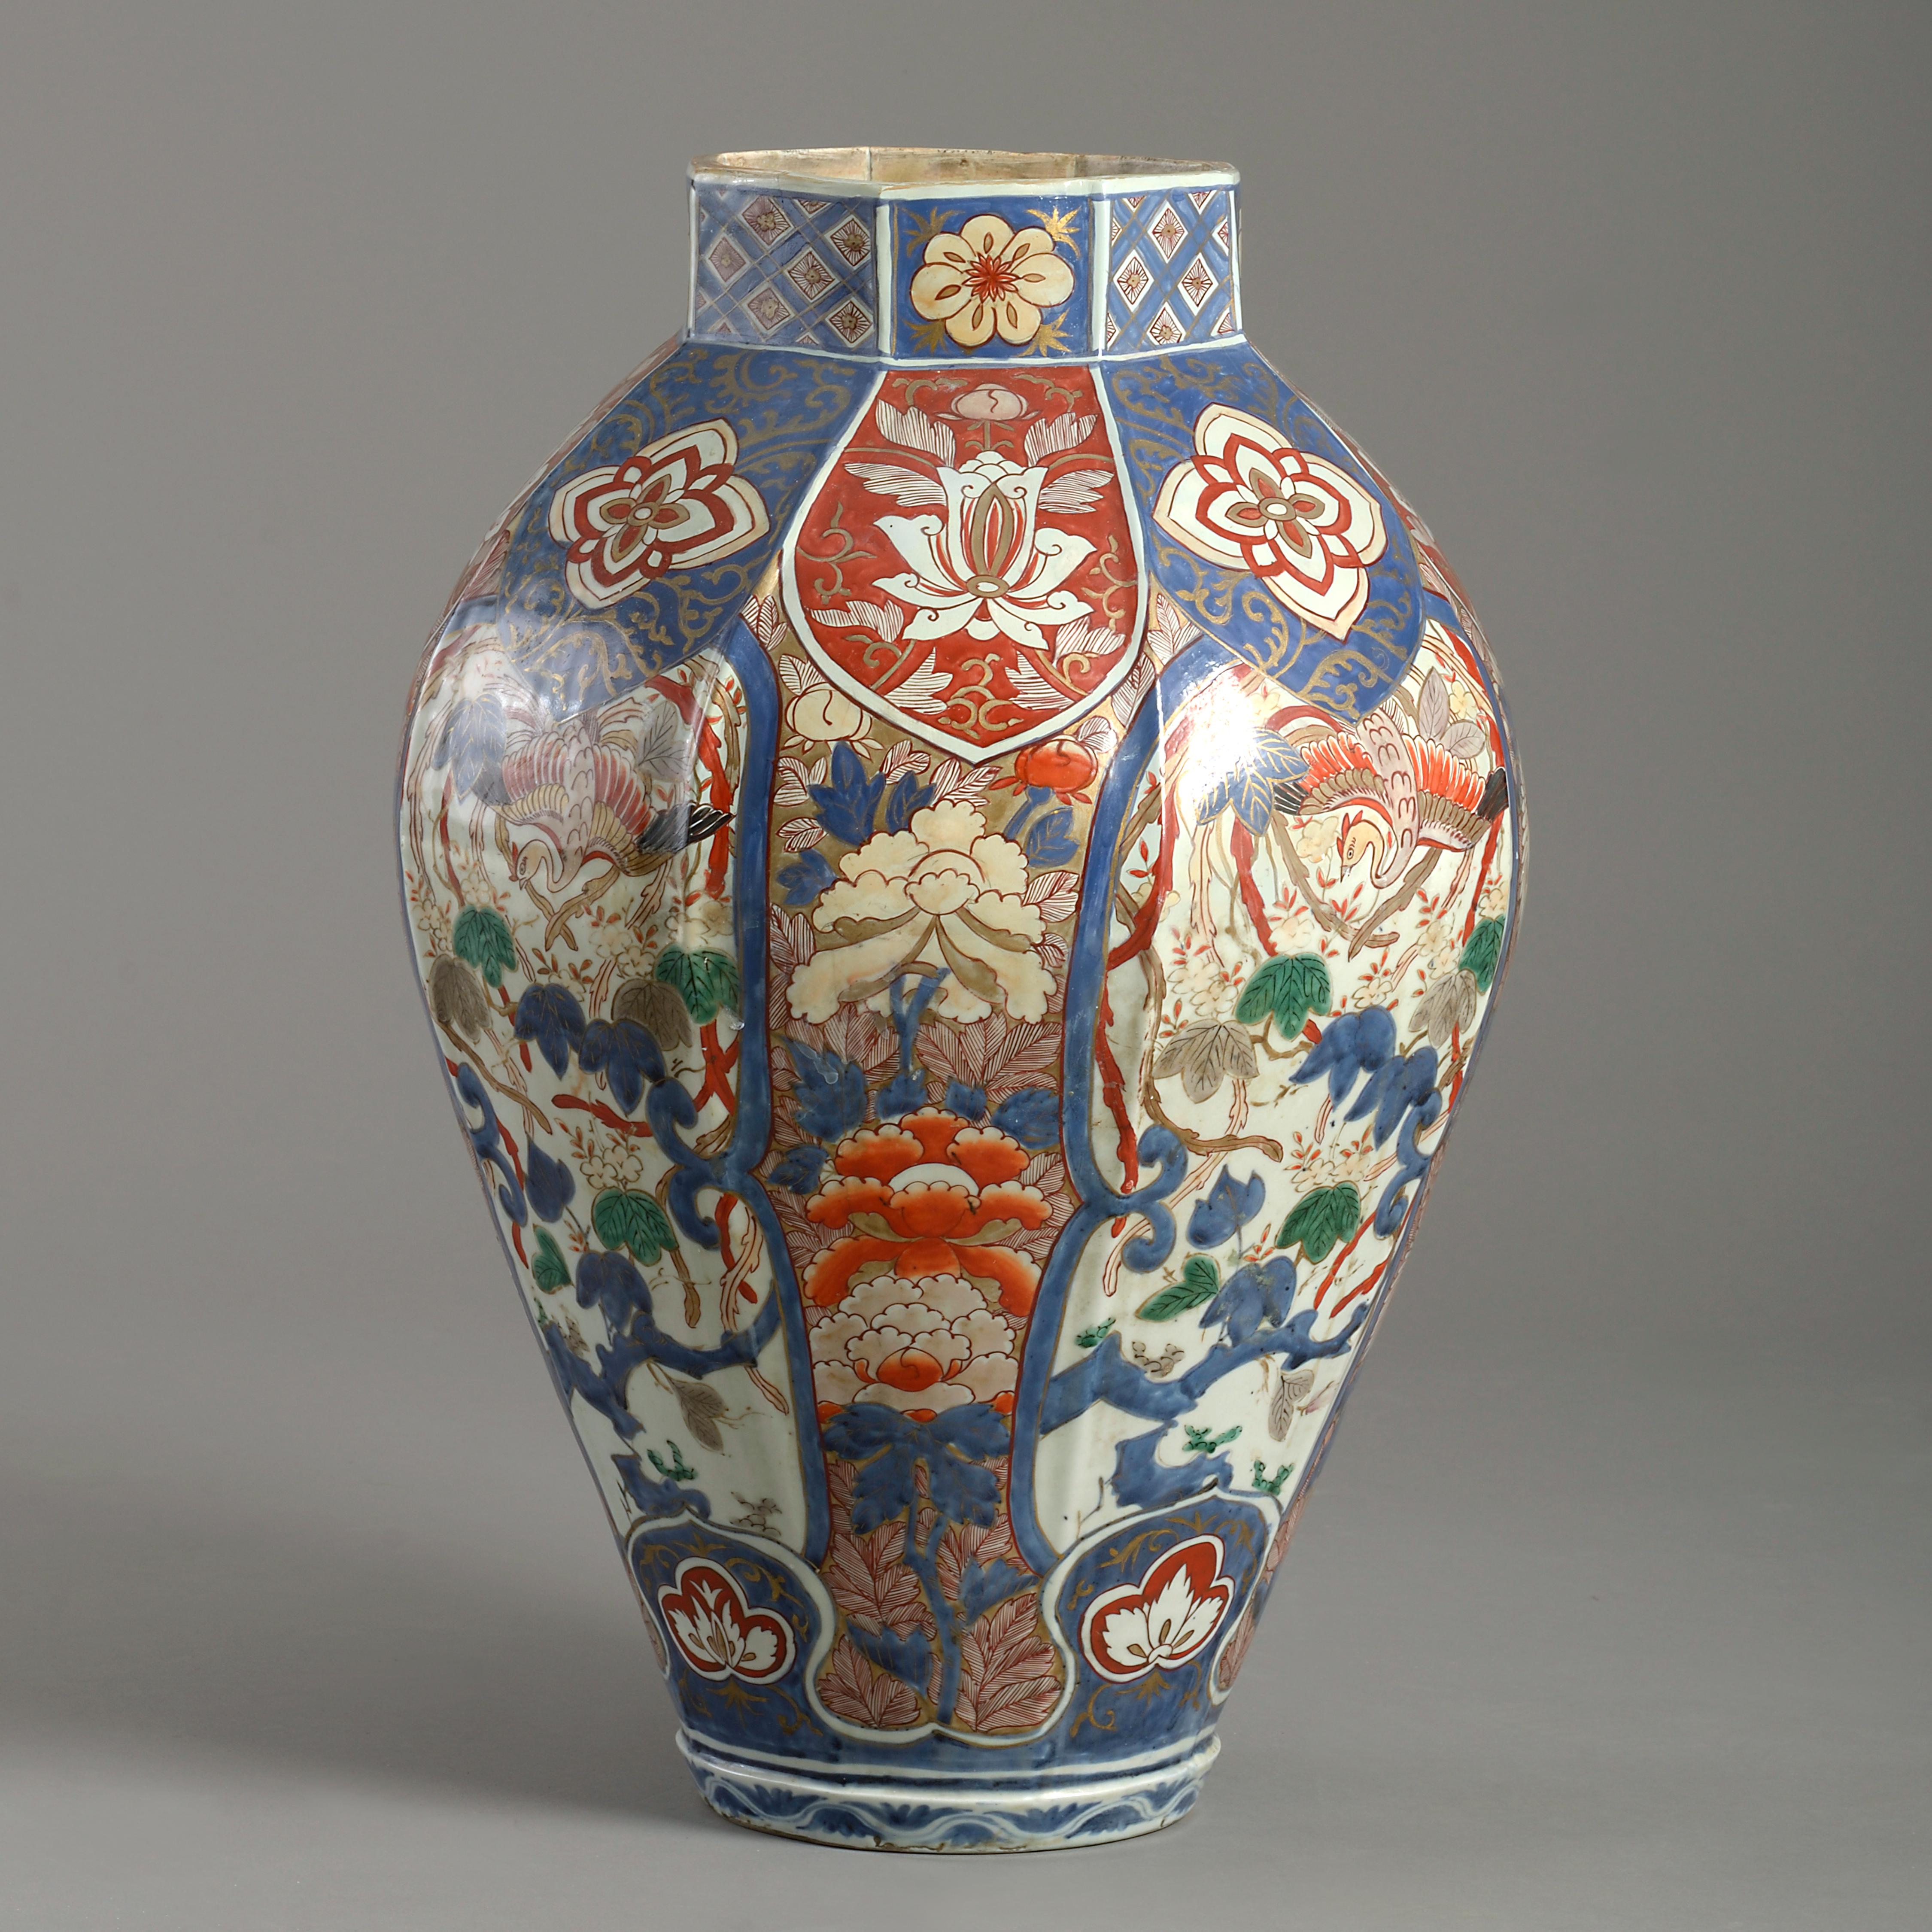 A large Japanese Imari faceted octagonal vase, circa 1700.

Decorated with panels of birds among flowering branches alternating with panels of peonies and chrysanthemum.